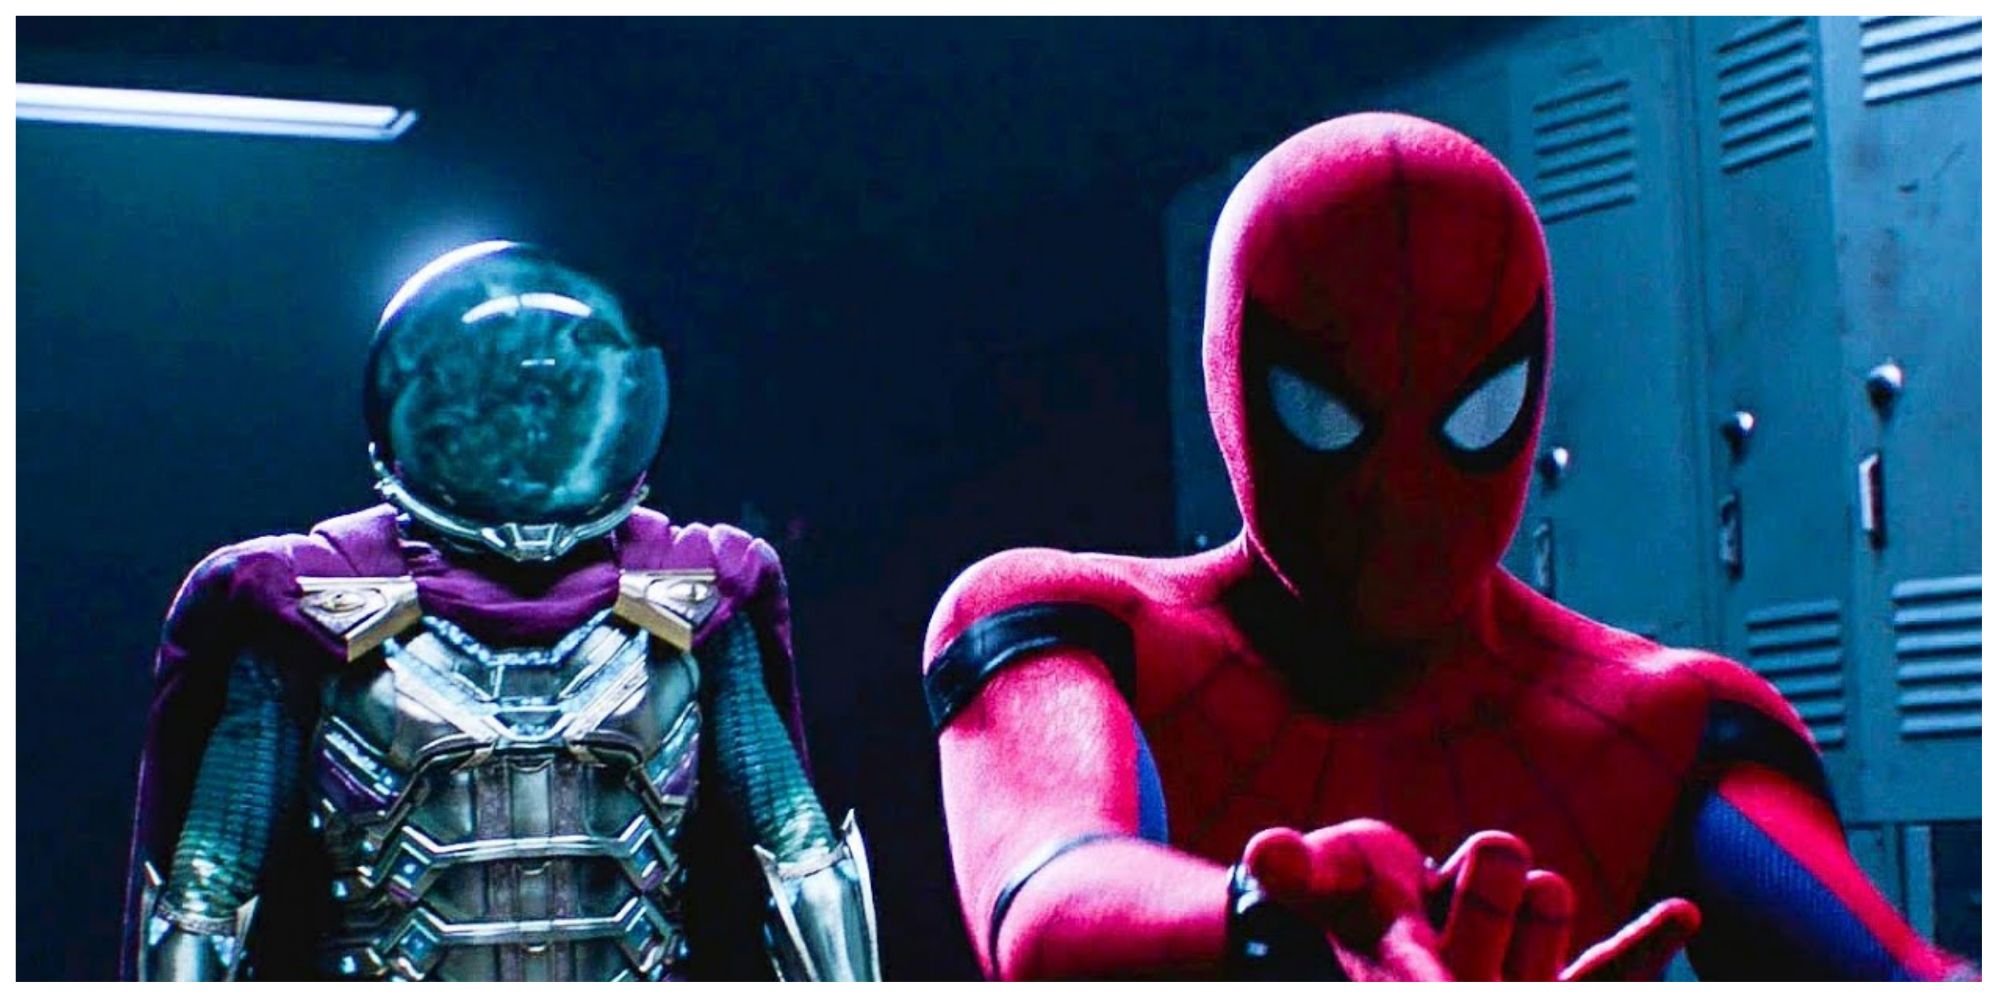 Spider-Man vs. Mysterio in Spider-Man Far From Home.